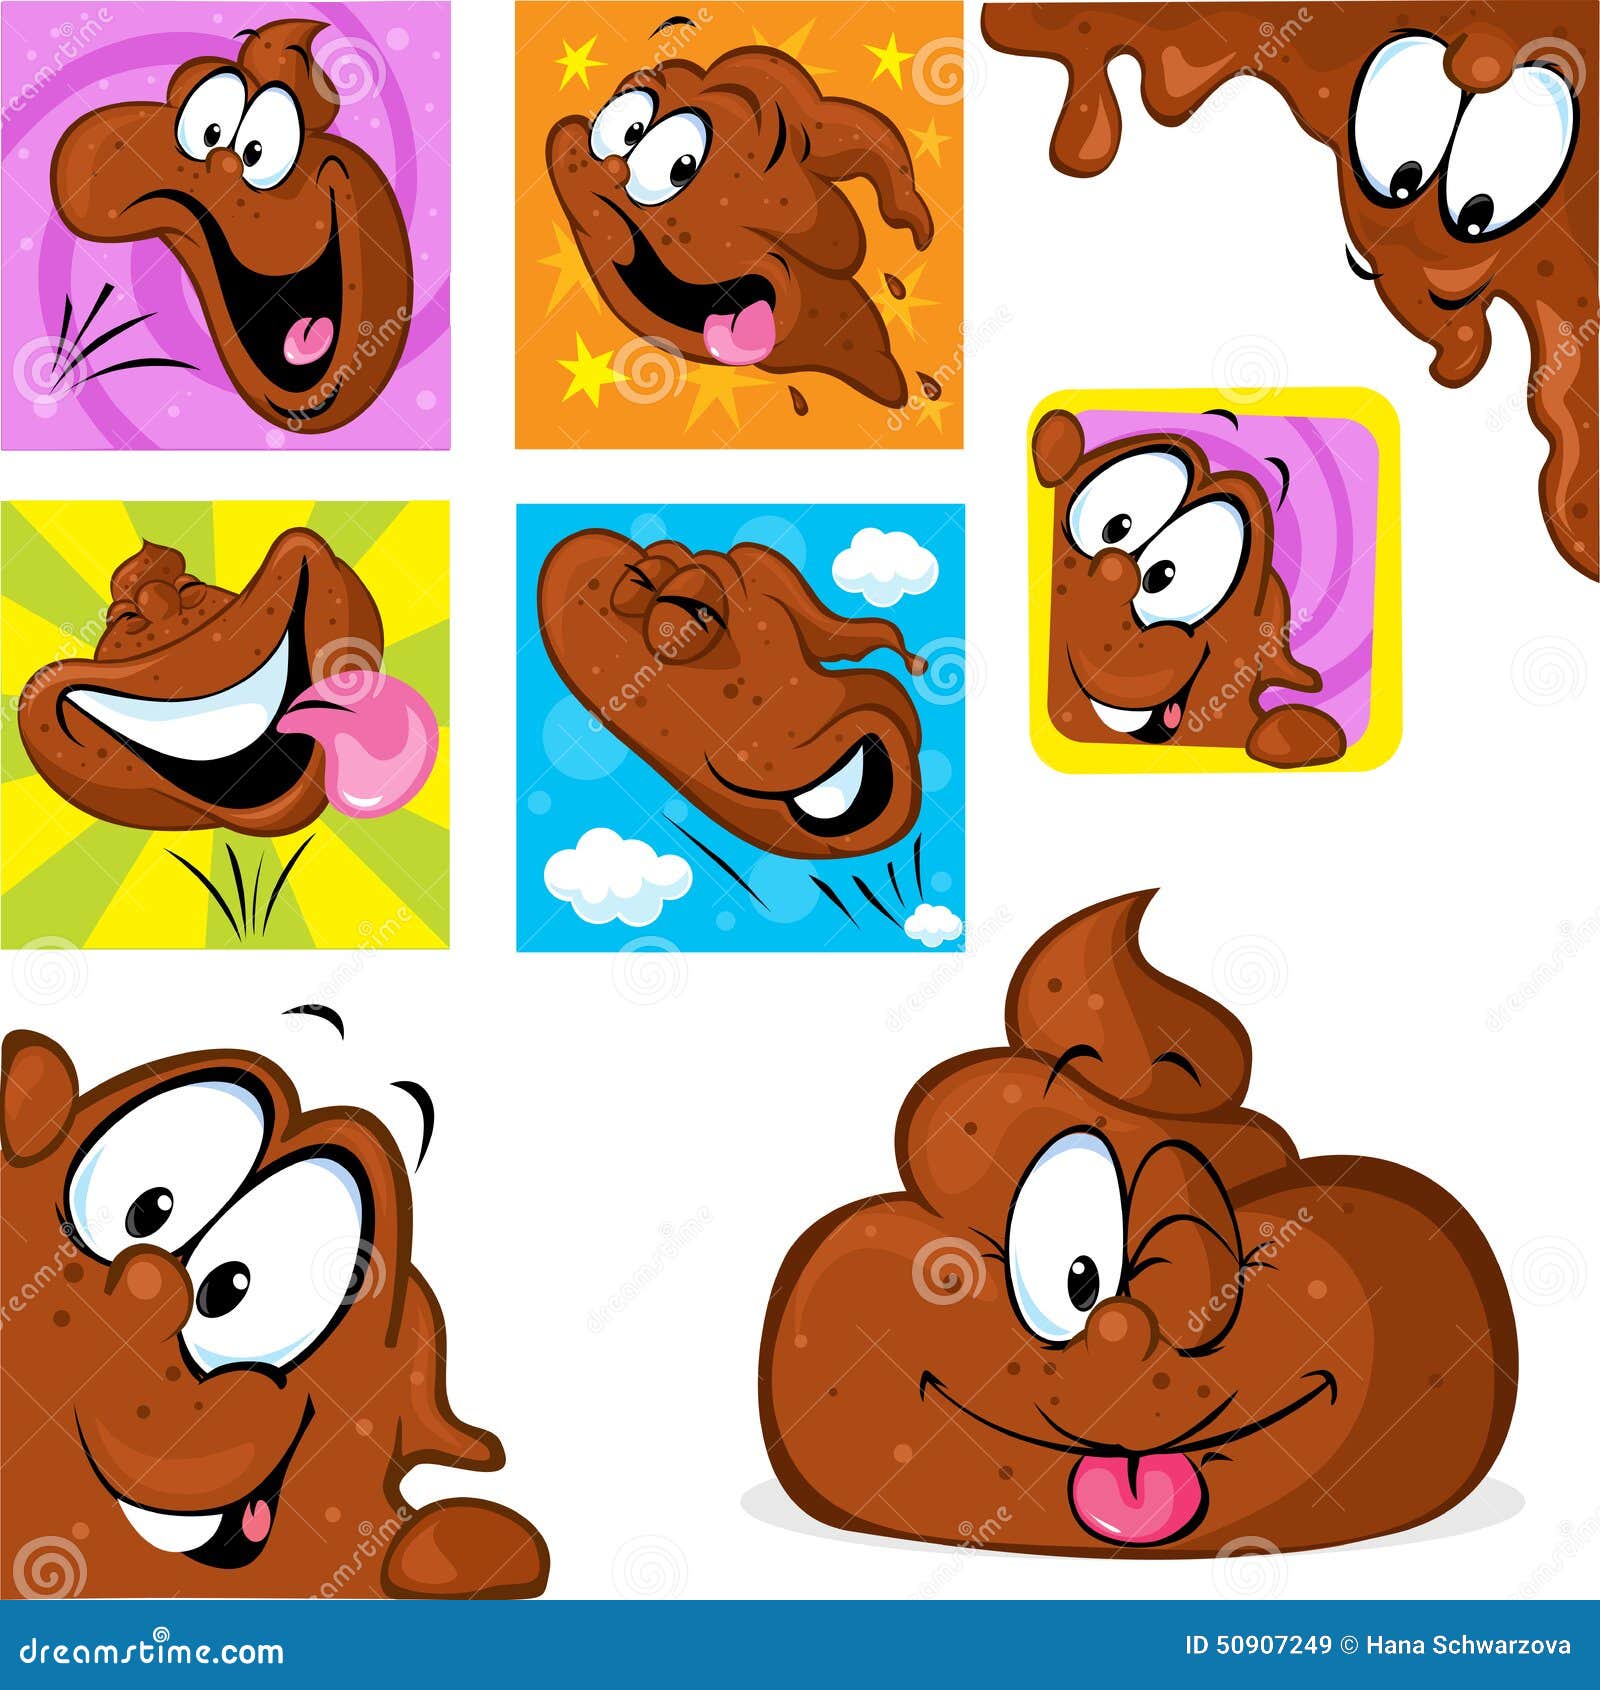 funny poo character in many position - jumping, peeking out